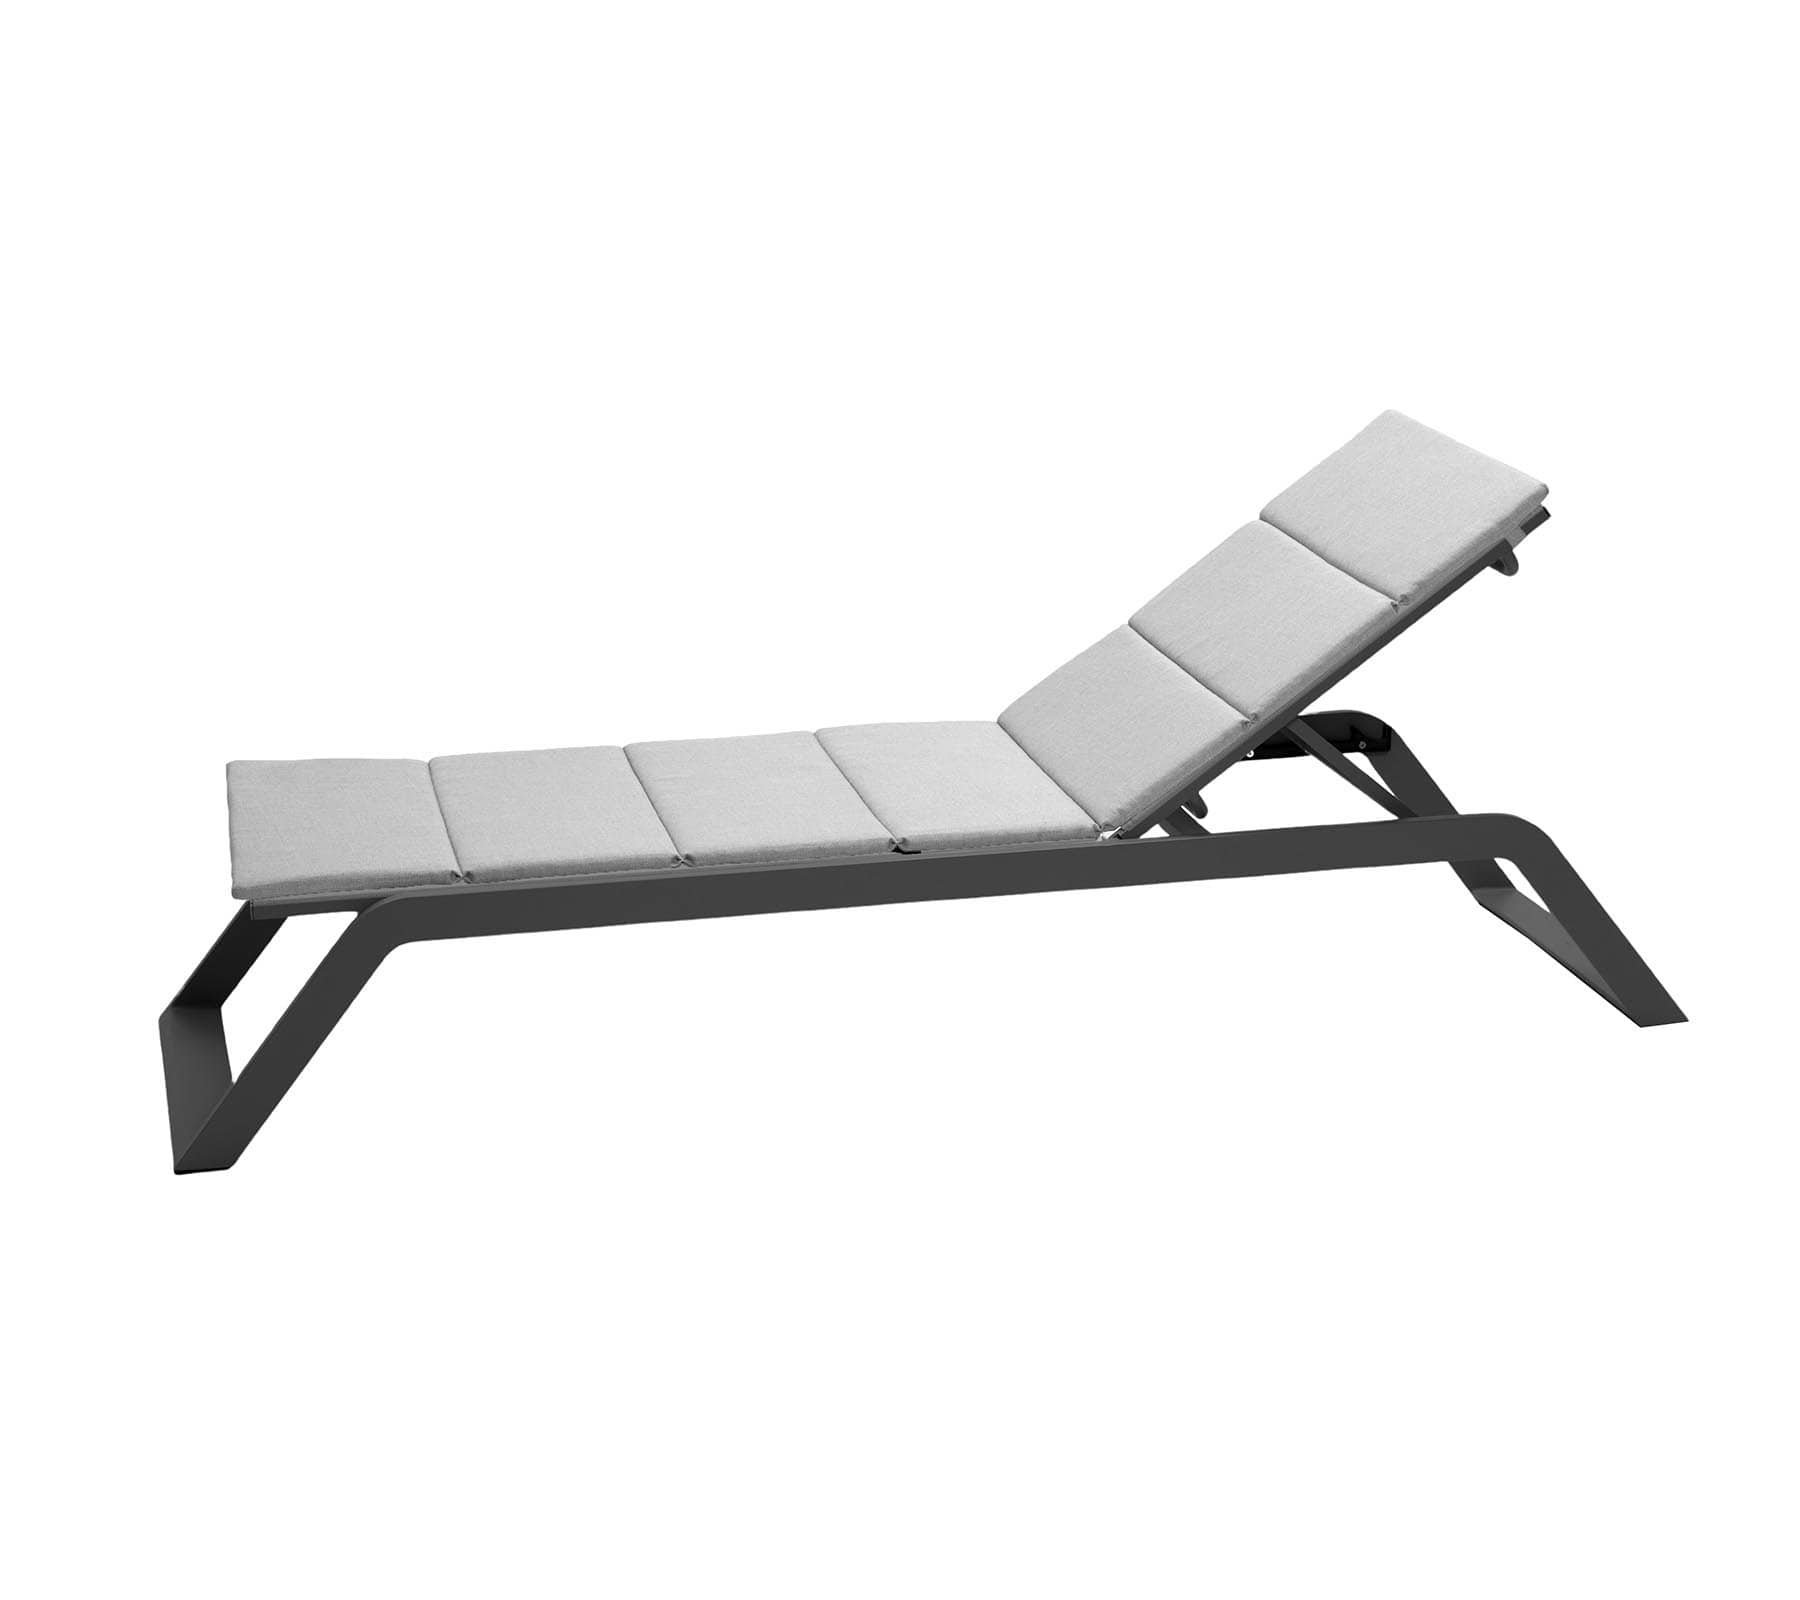  Boxhill's Siesta dark grey outdoor chaise lounge with  light grey cushion on white background